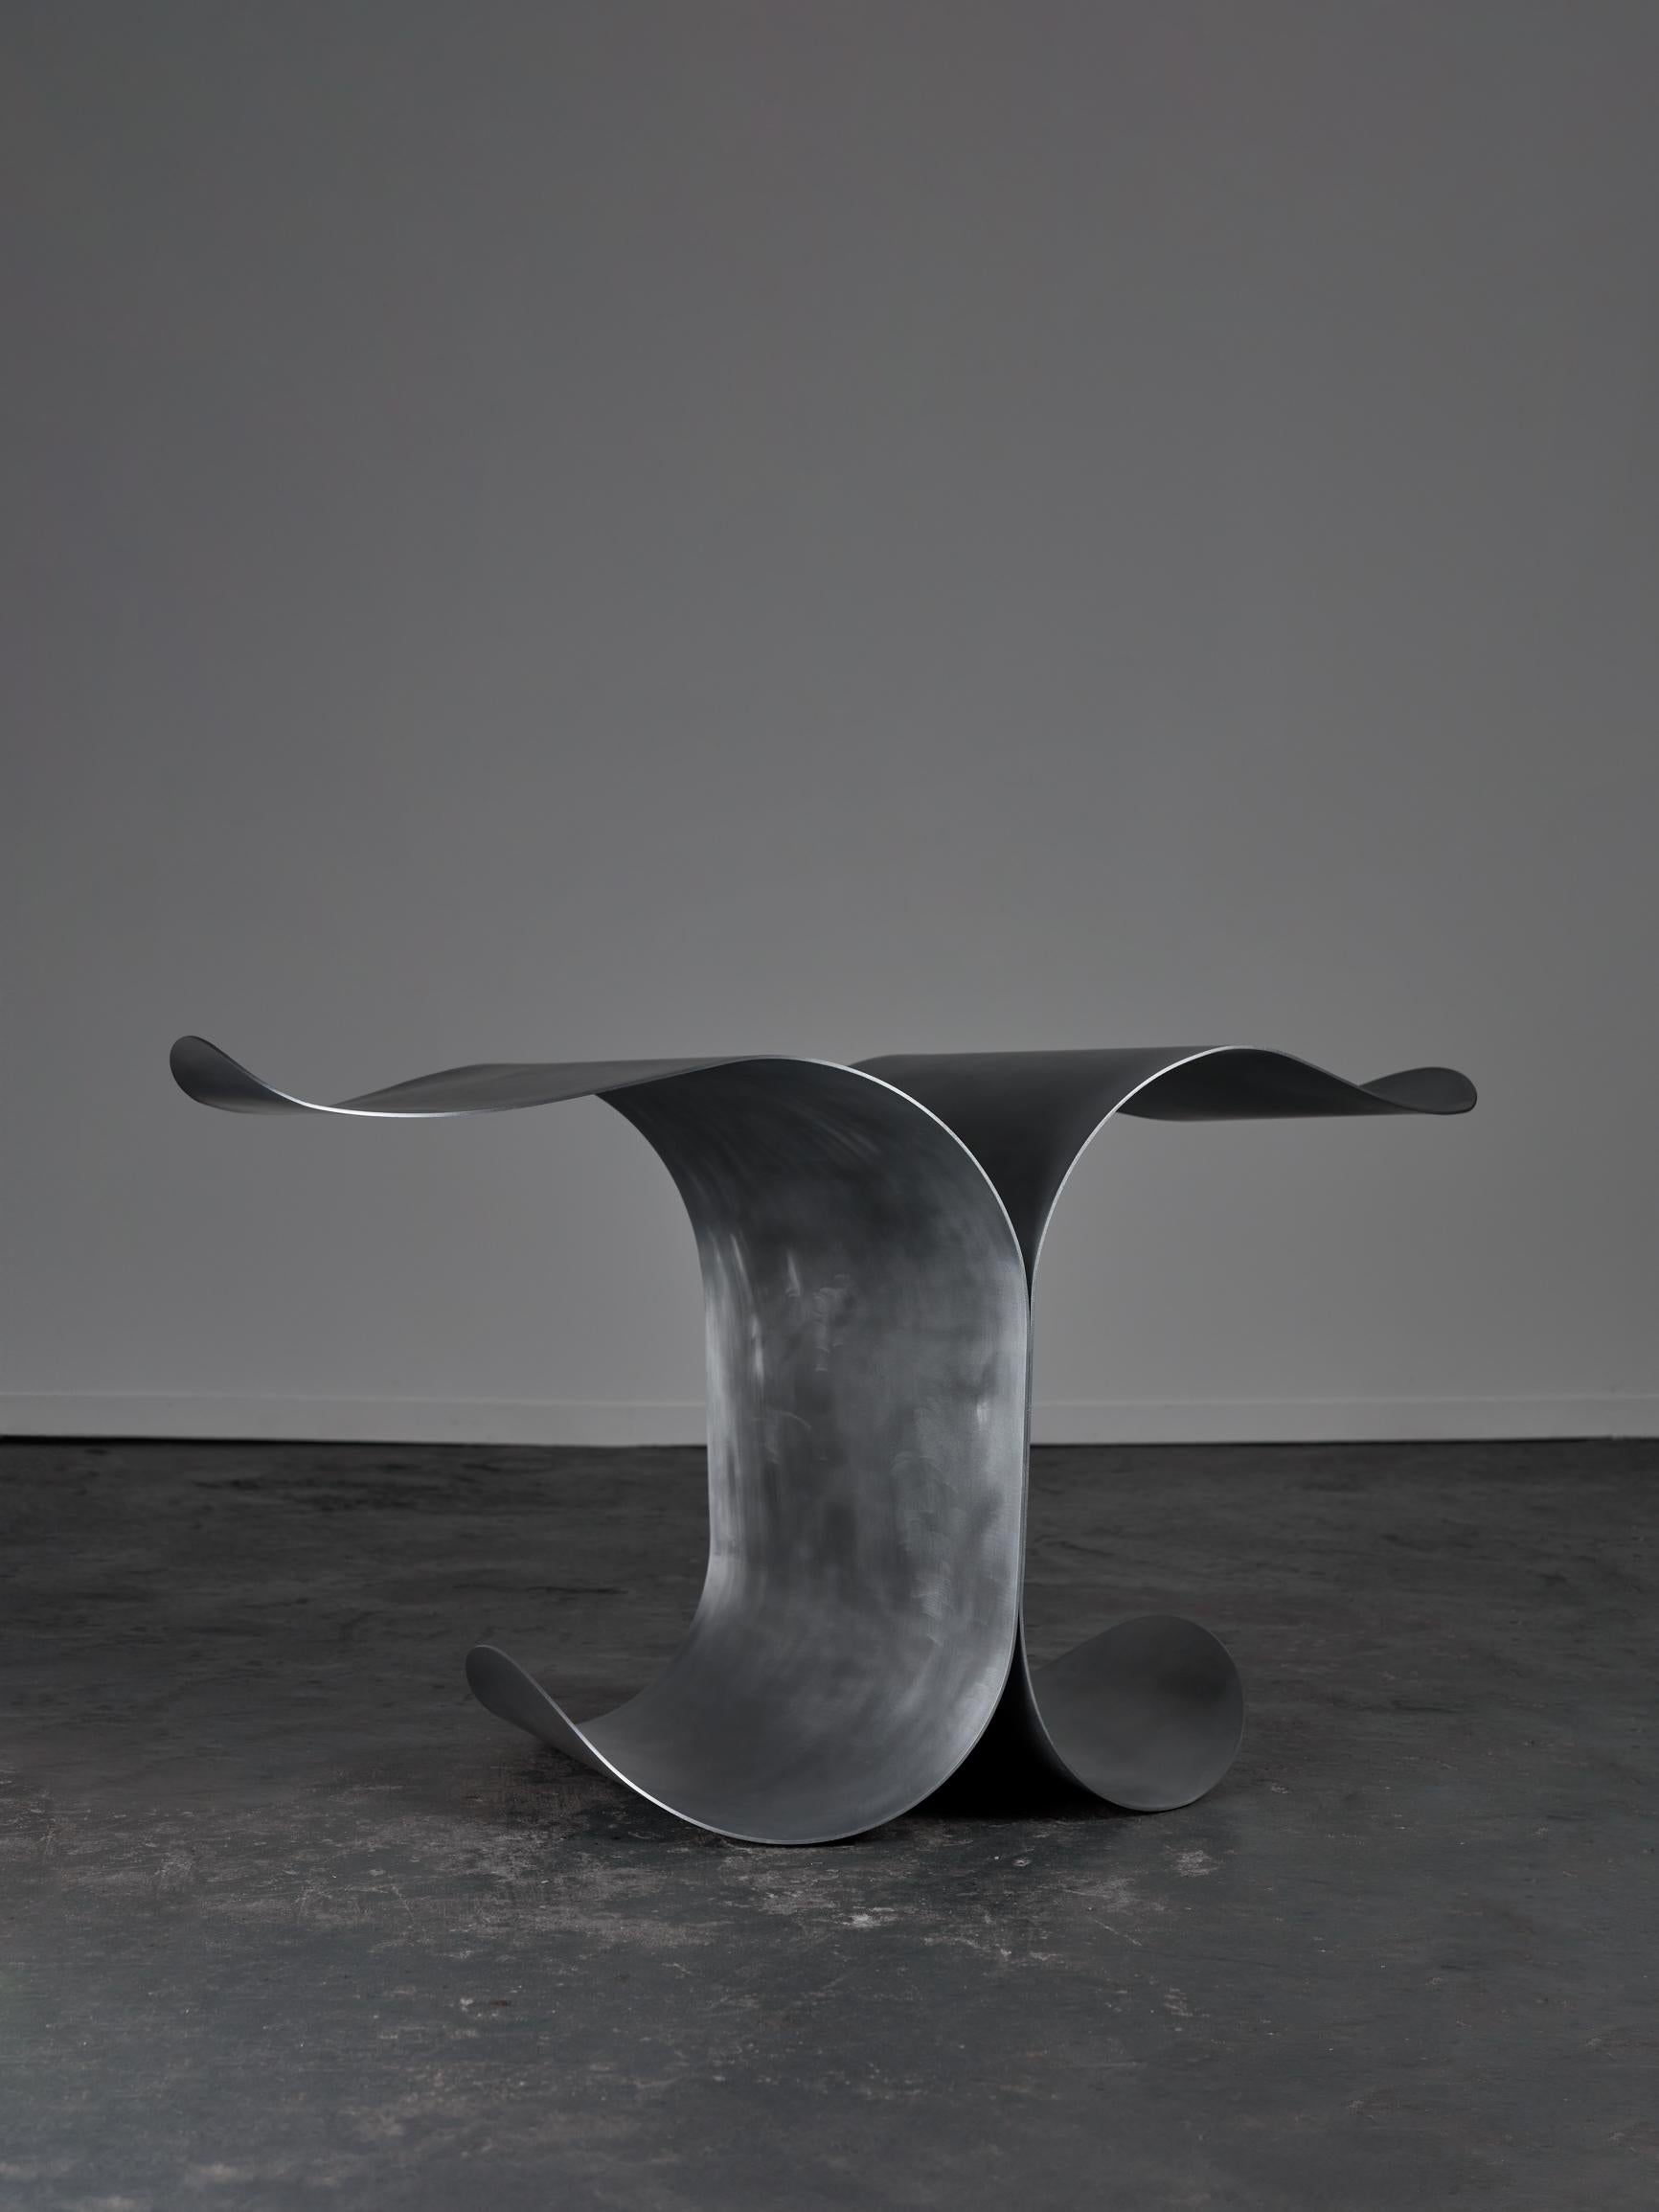 Large Waves Side Table by Yoon Shun
Dimensions: D 60.5 x W 109 x H 58 cm. 
Materials: Aluminum and silicone. 

This side table is made of 3MM aluminum. Hands machine rolled, polished, and silicon coated. Available in three different sizes and in a